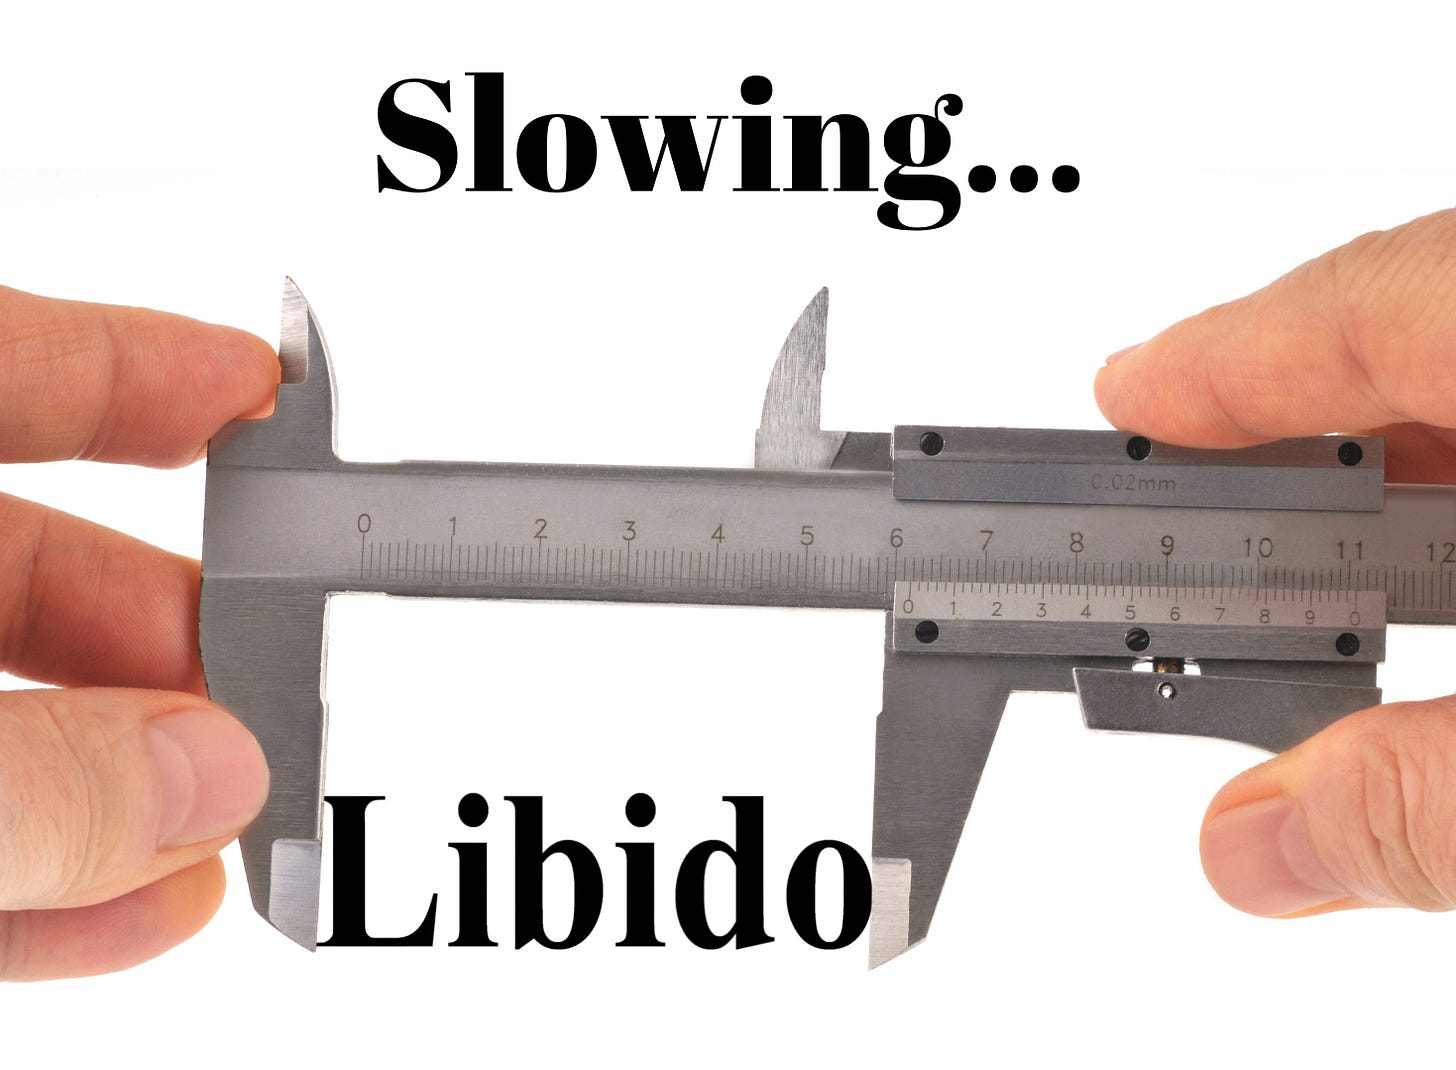 Measuring rule with the word Slowing above the word Libido.